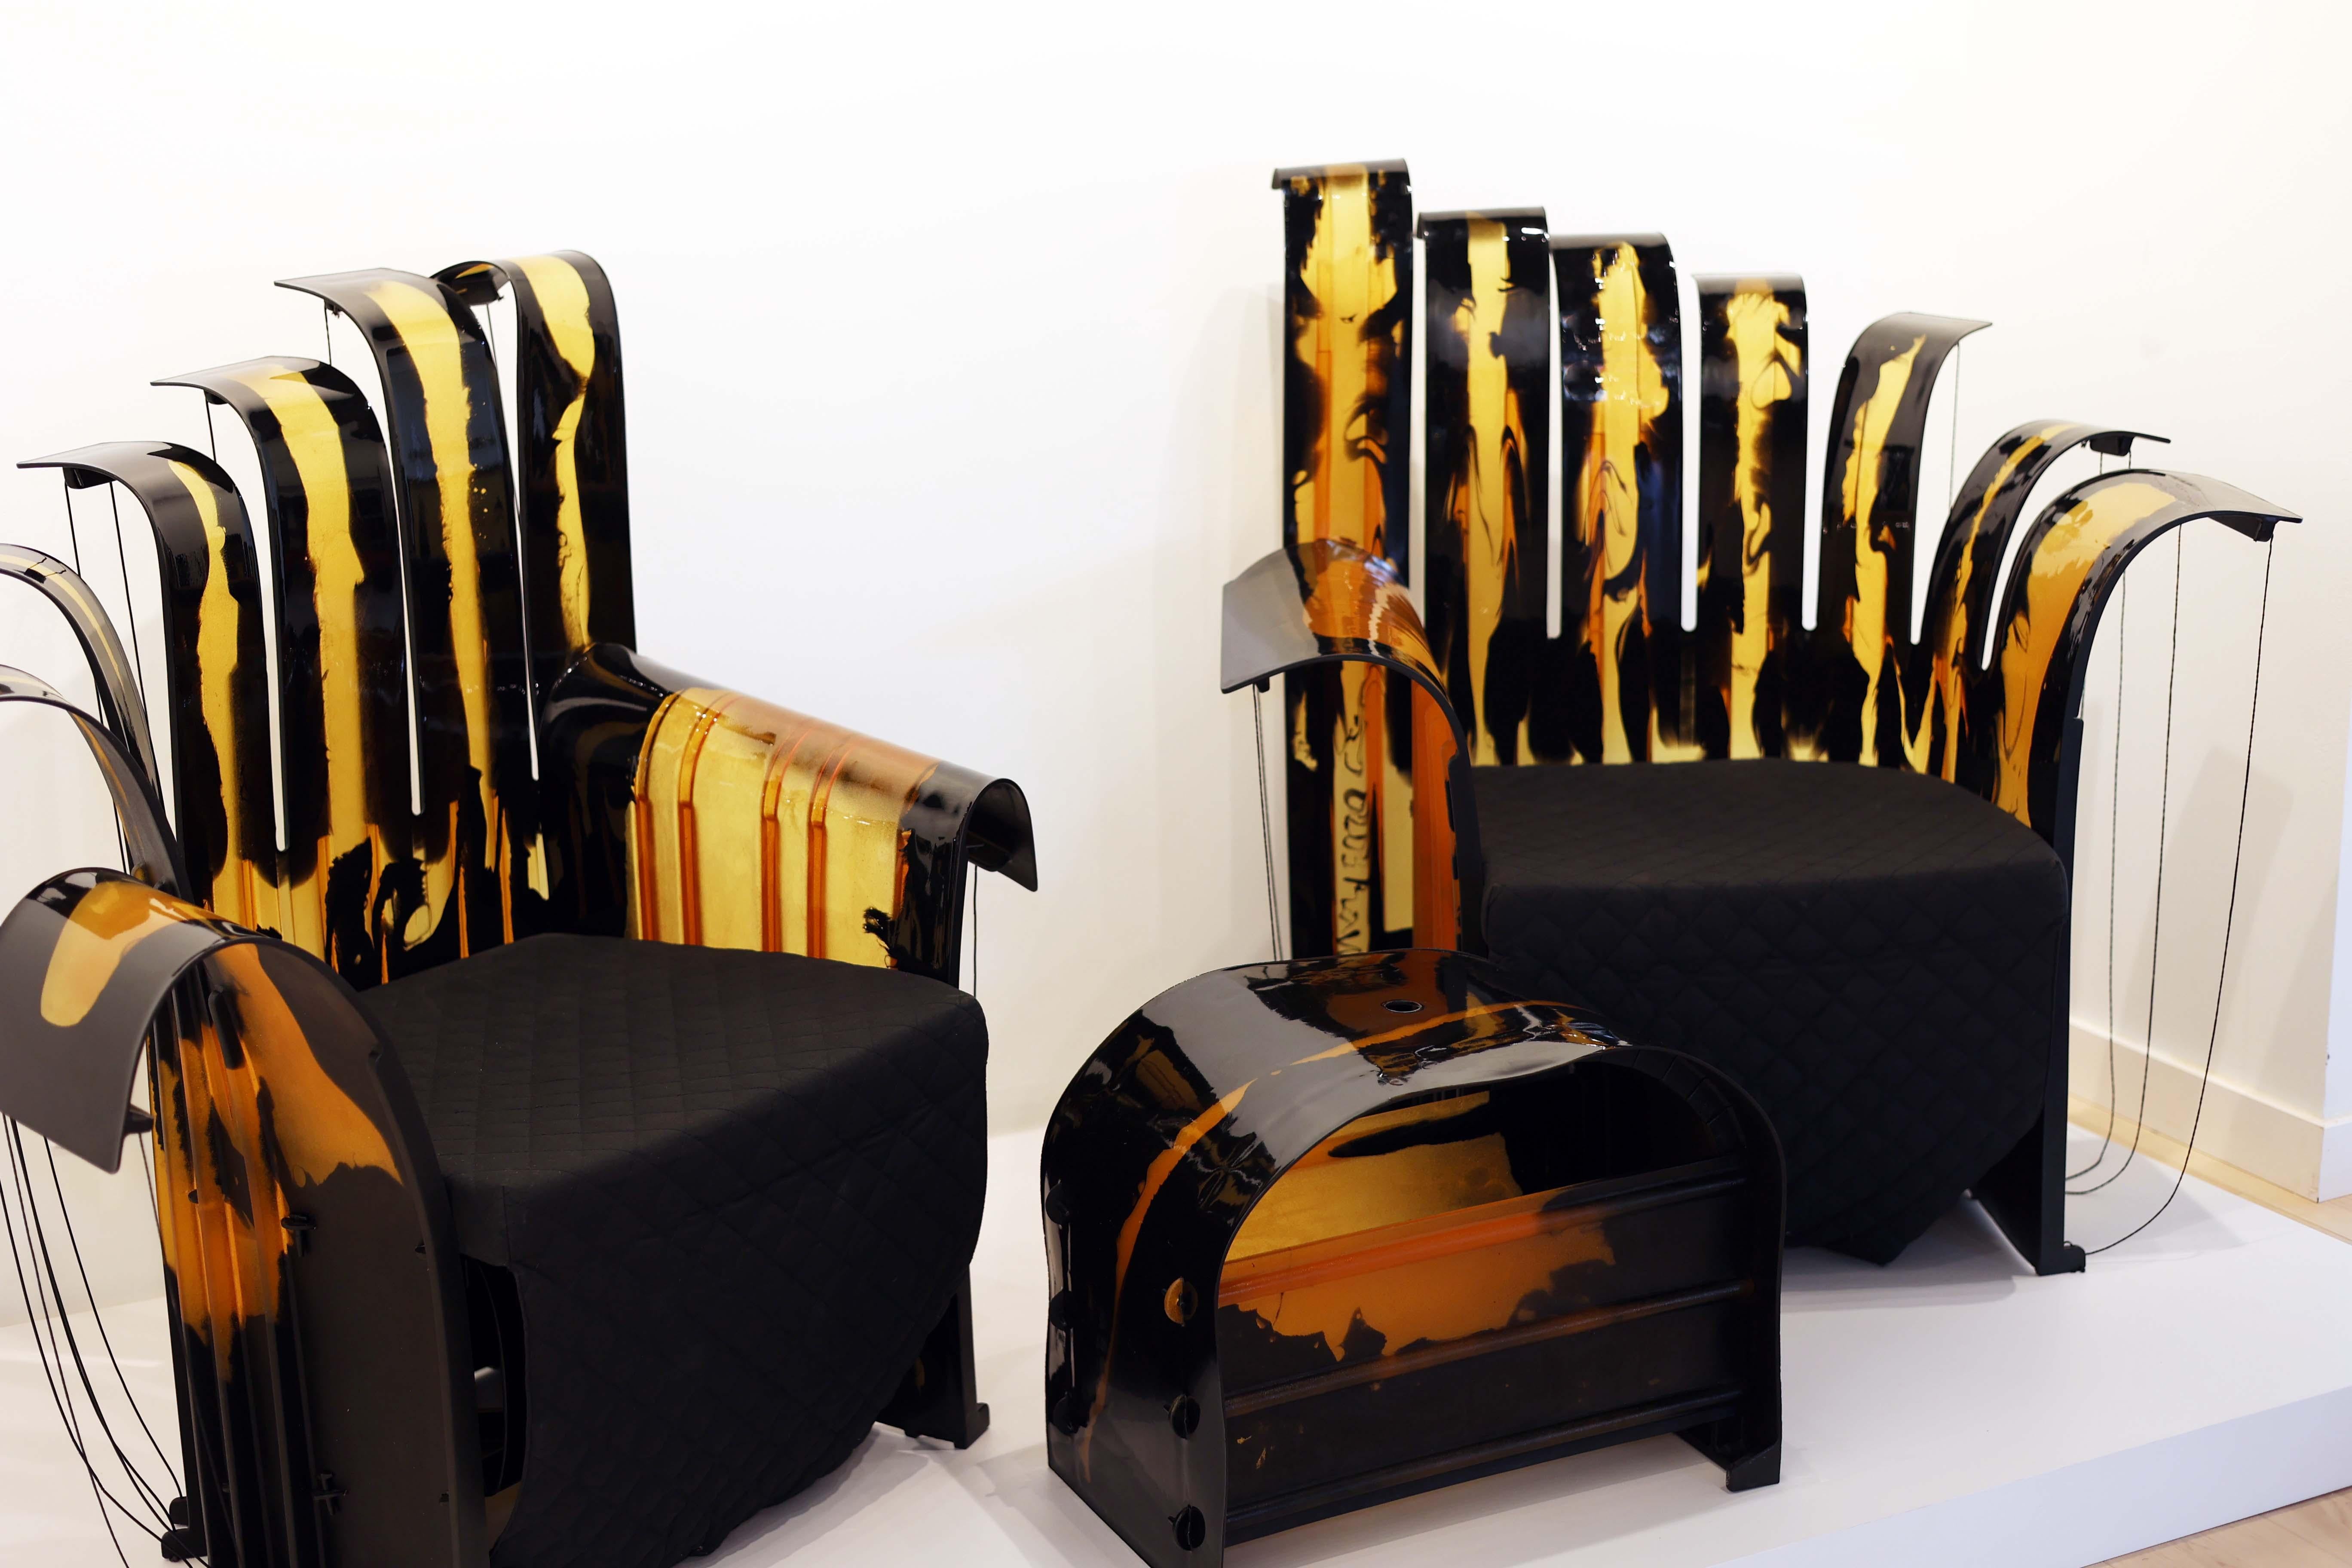 From the Zerodisegno Nobody's Perfect series in 2003. One of the only full sets known to exist. Nobody's King, Nobody's Queen, and Nobody's Pouf make up one of the rarest and most sought after Pesce seating sets on earth. Spectacular black and gold